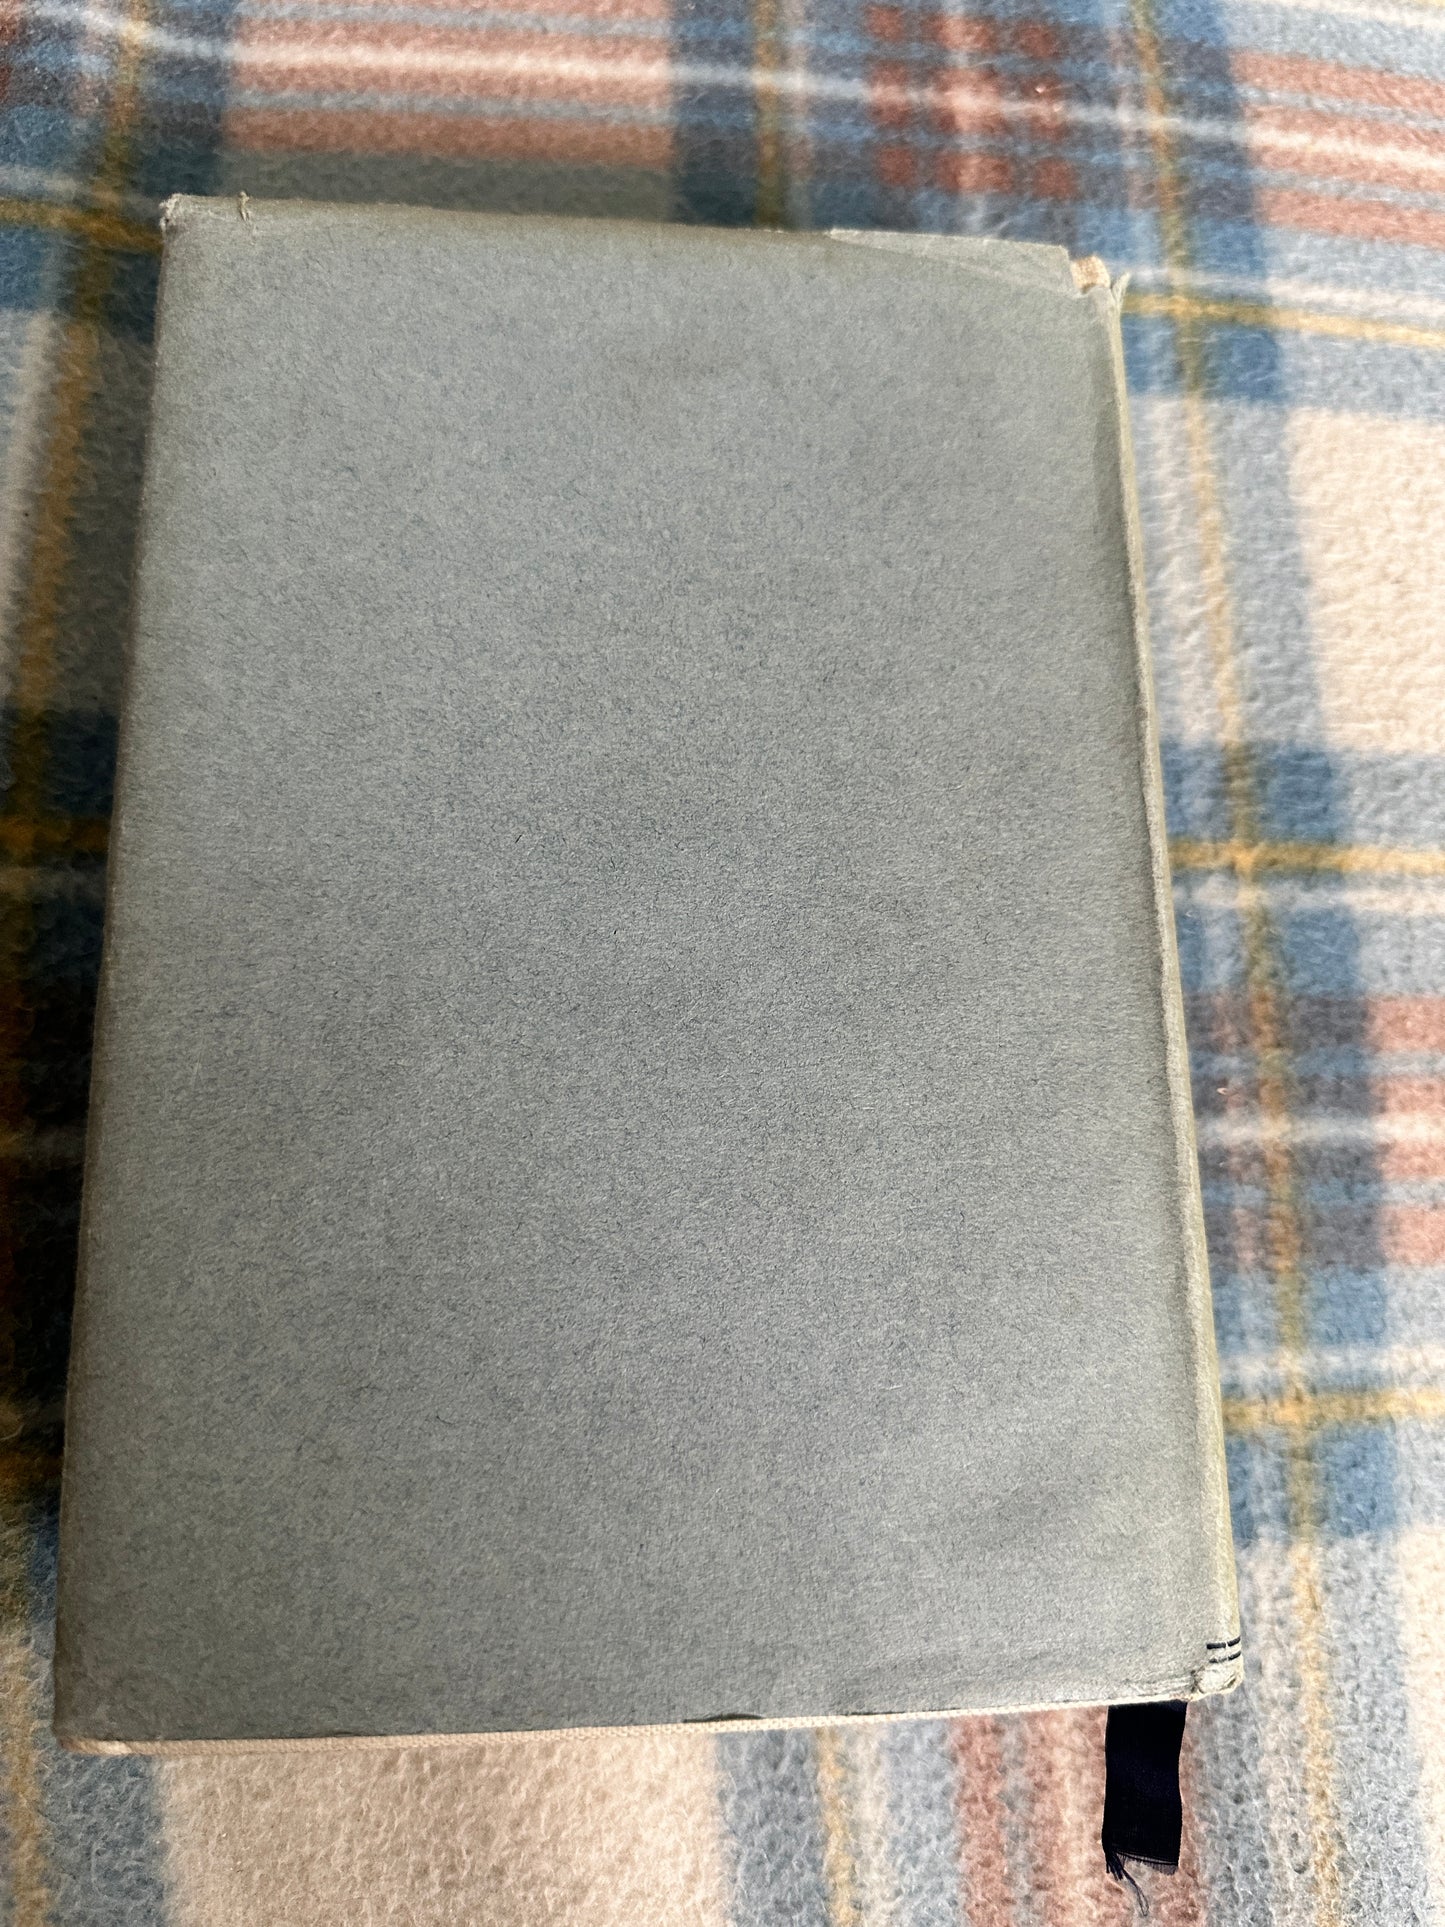 1935 Poems Of Today(First & Second Series) Buckram edition(Sidgewick & Jackson)